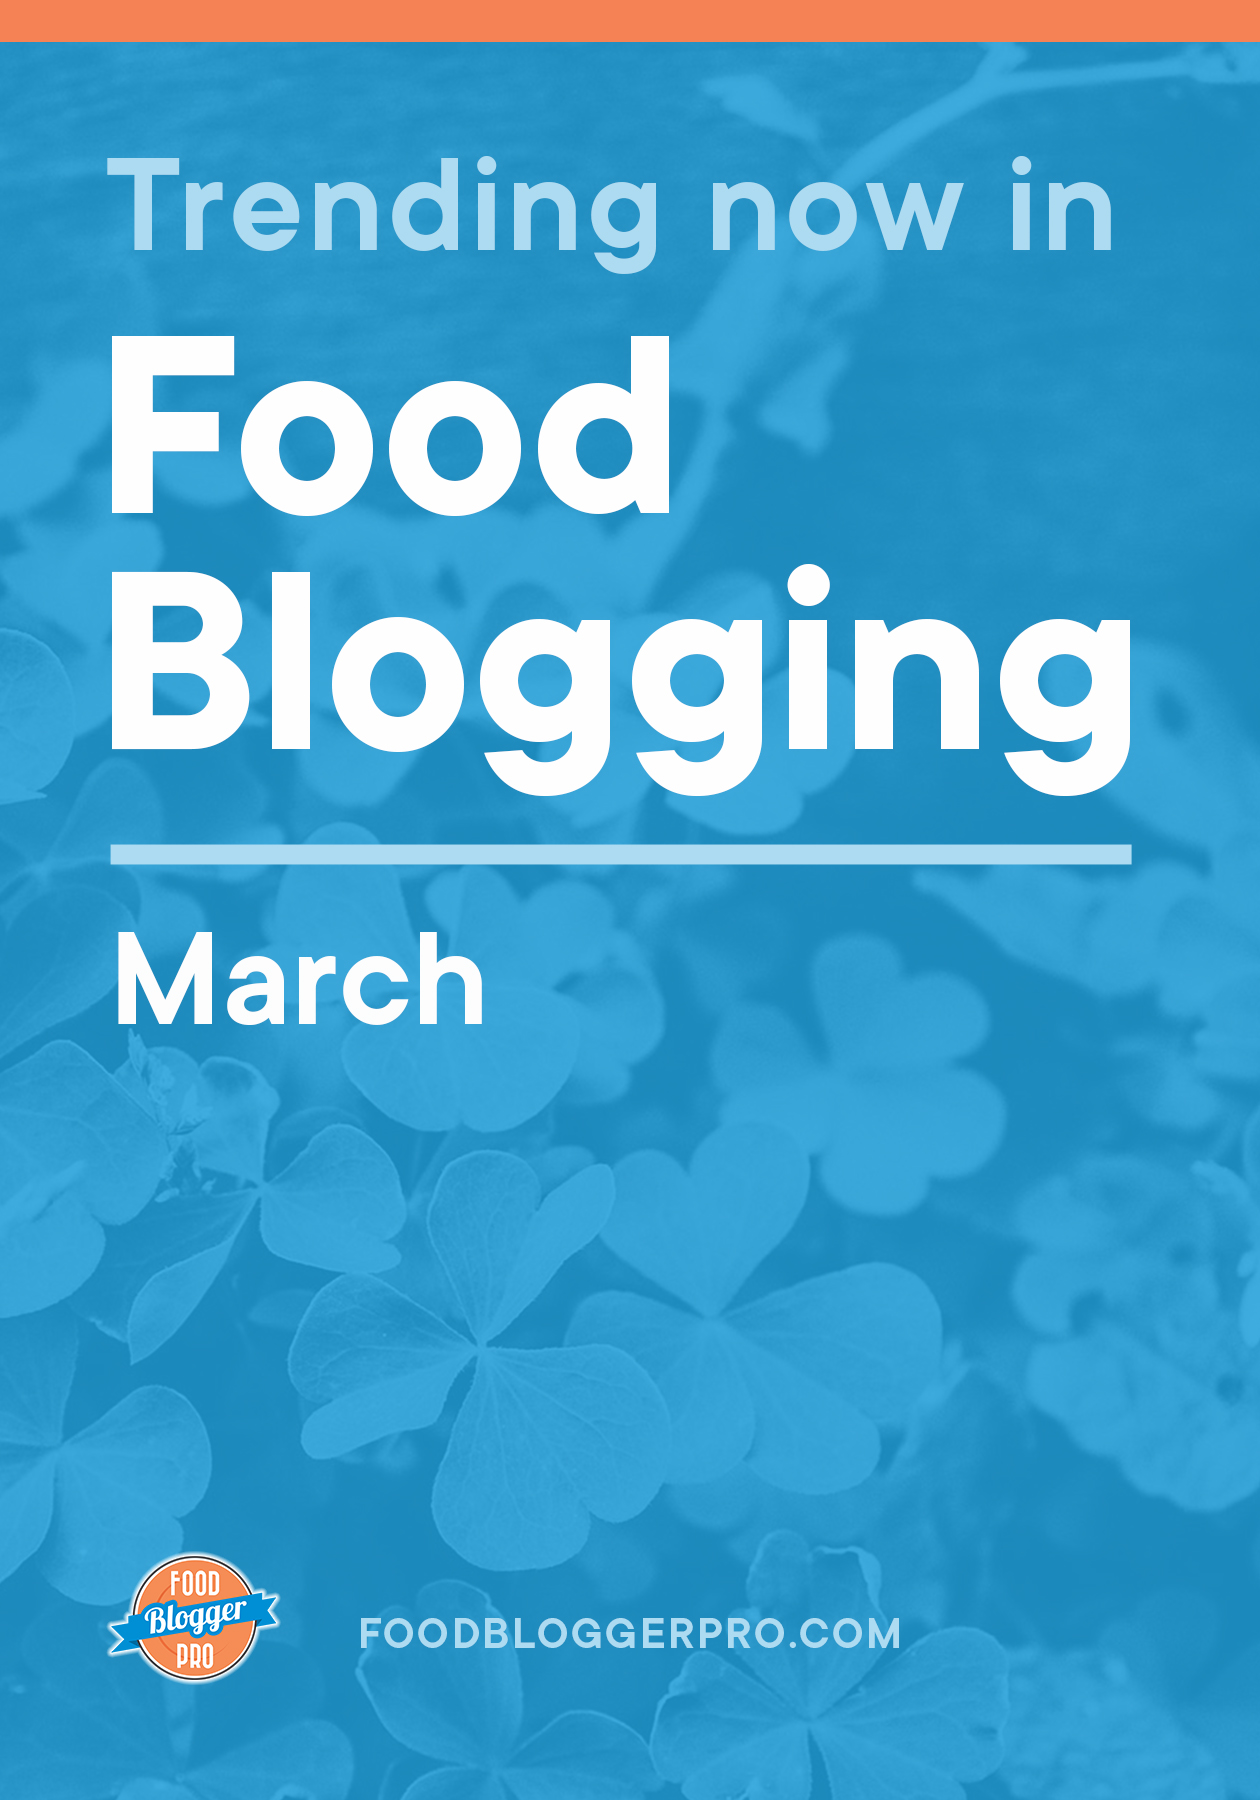 Blue graphic of clovers that reads 'Trending Now in Food Blogger - March' with the Food Blogger Pro logo